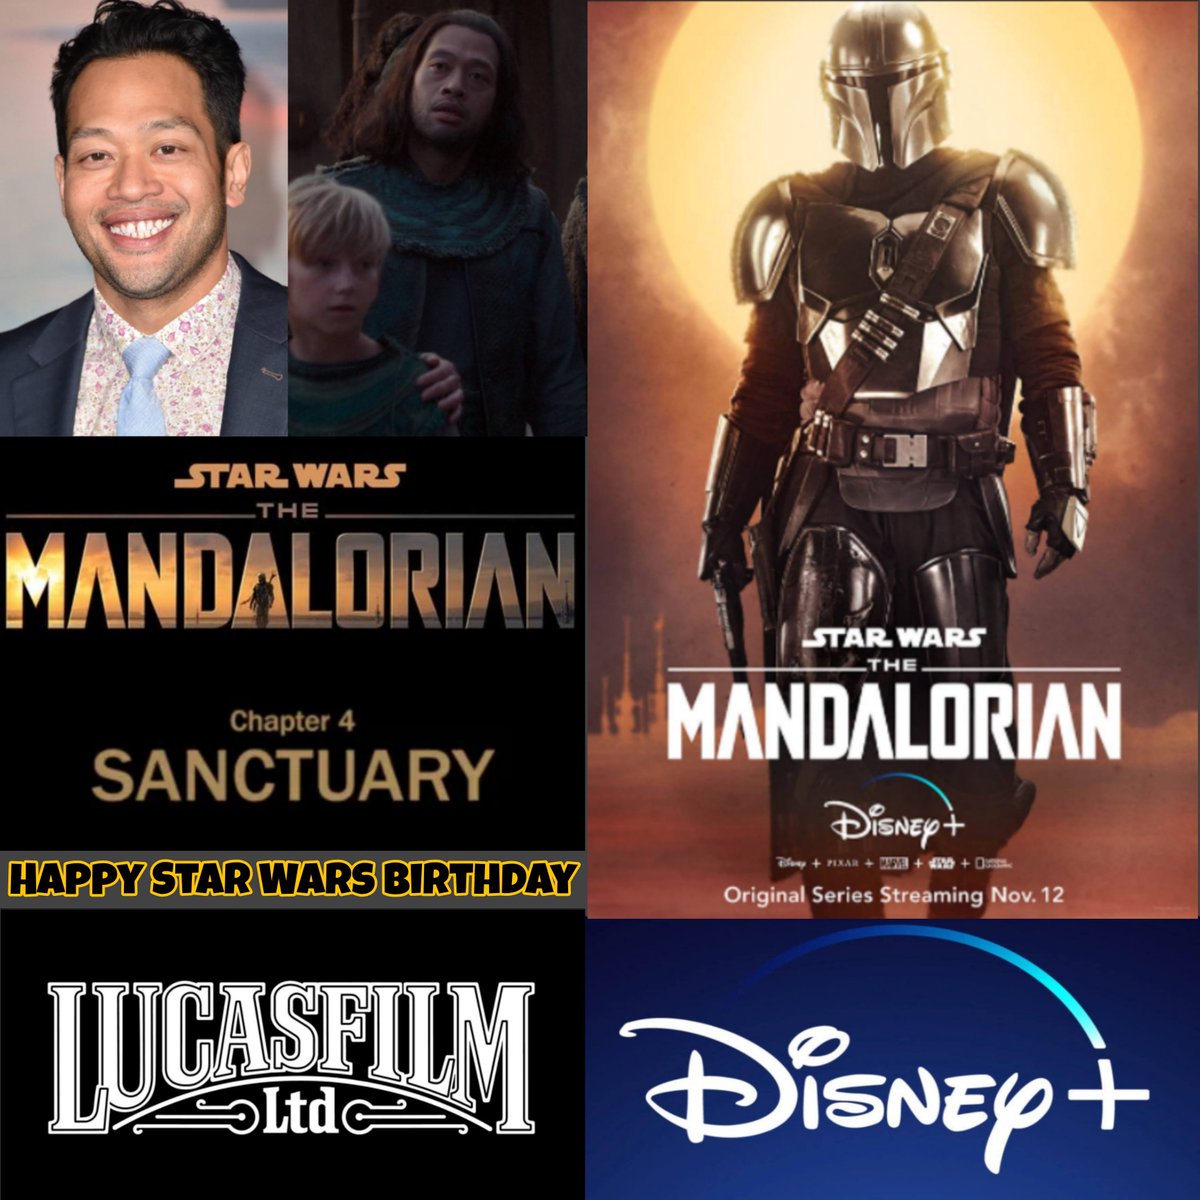 Happy Birthday to #EugeneCordero, he played Stoke in the 4th episode ''Sanctuary'' in the 1st season of #TheMandalorian. Instagram instagram.com/eugcordero/?hl…. May he have a good one.